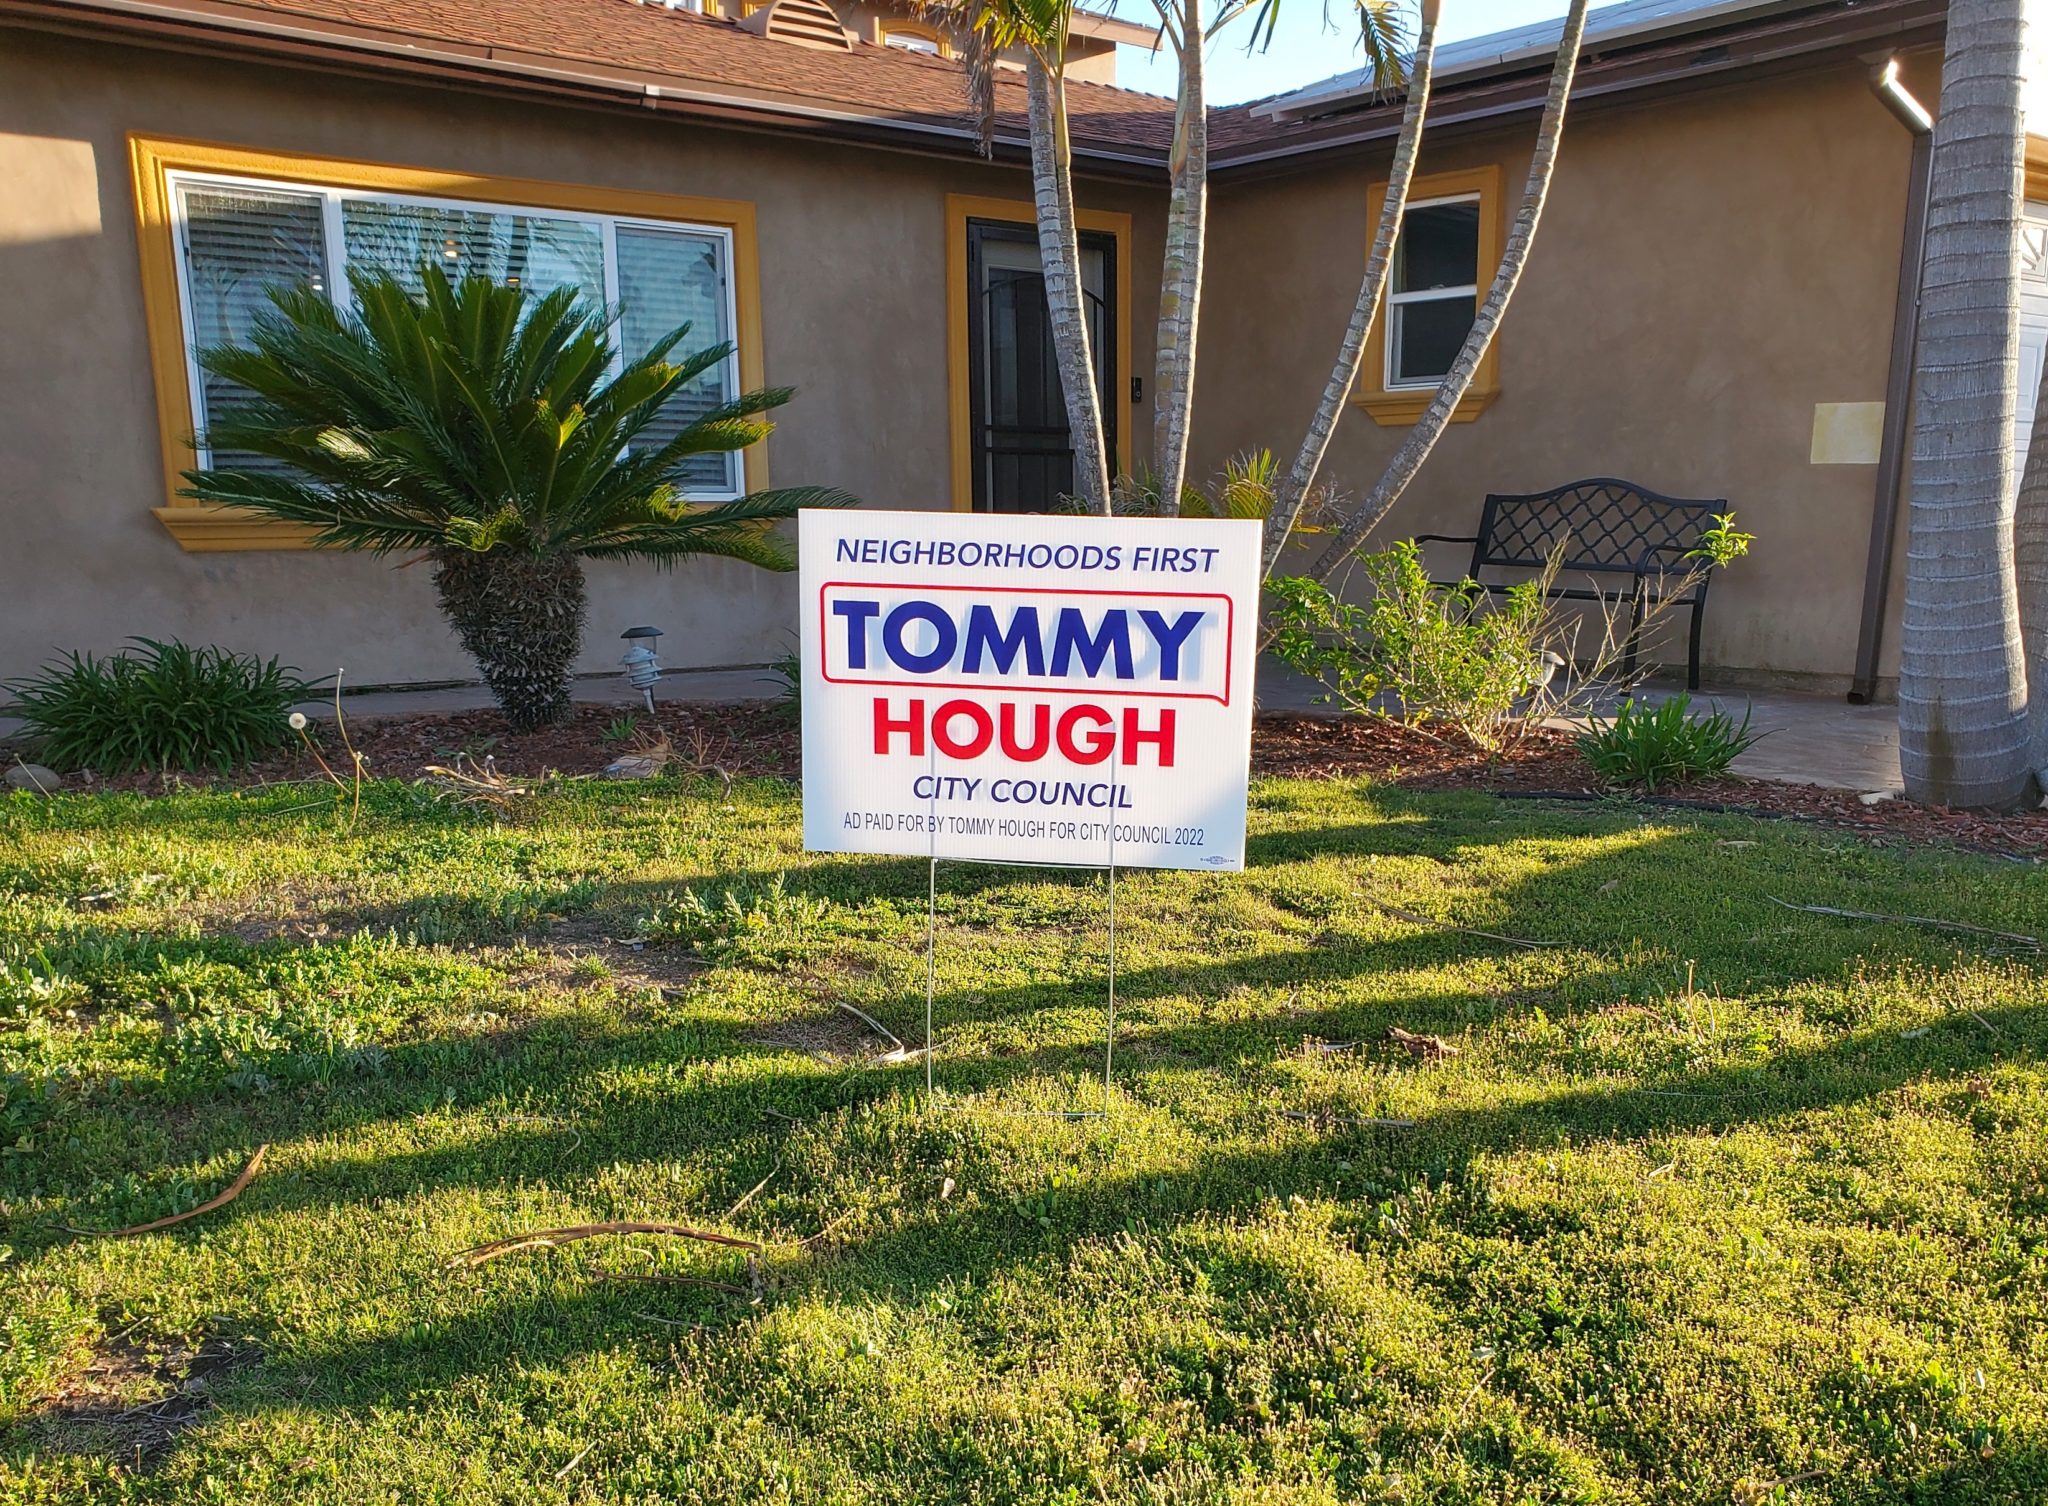 Tommy Hough yard sign in front of a house in San Diego